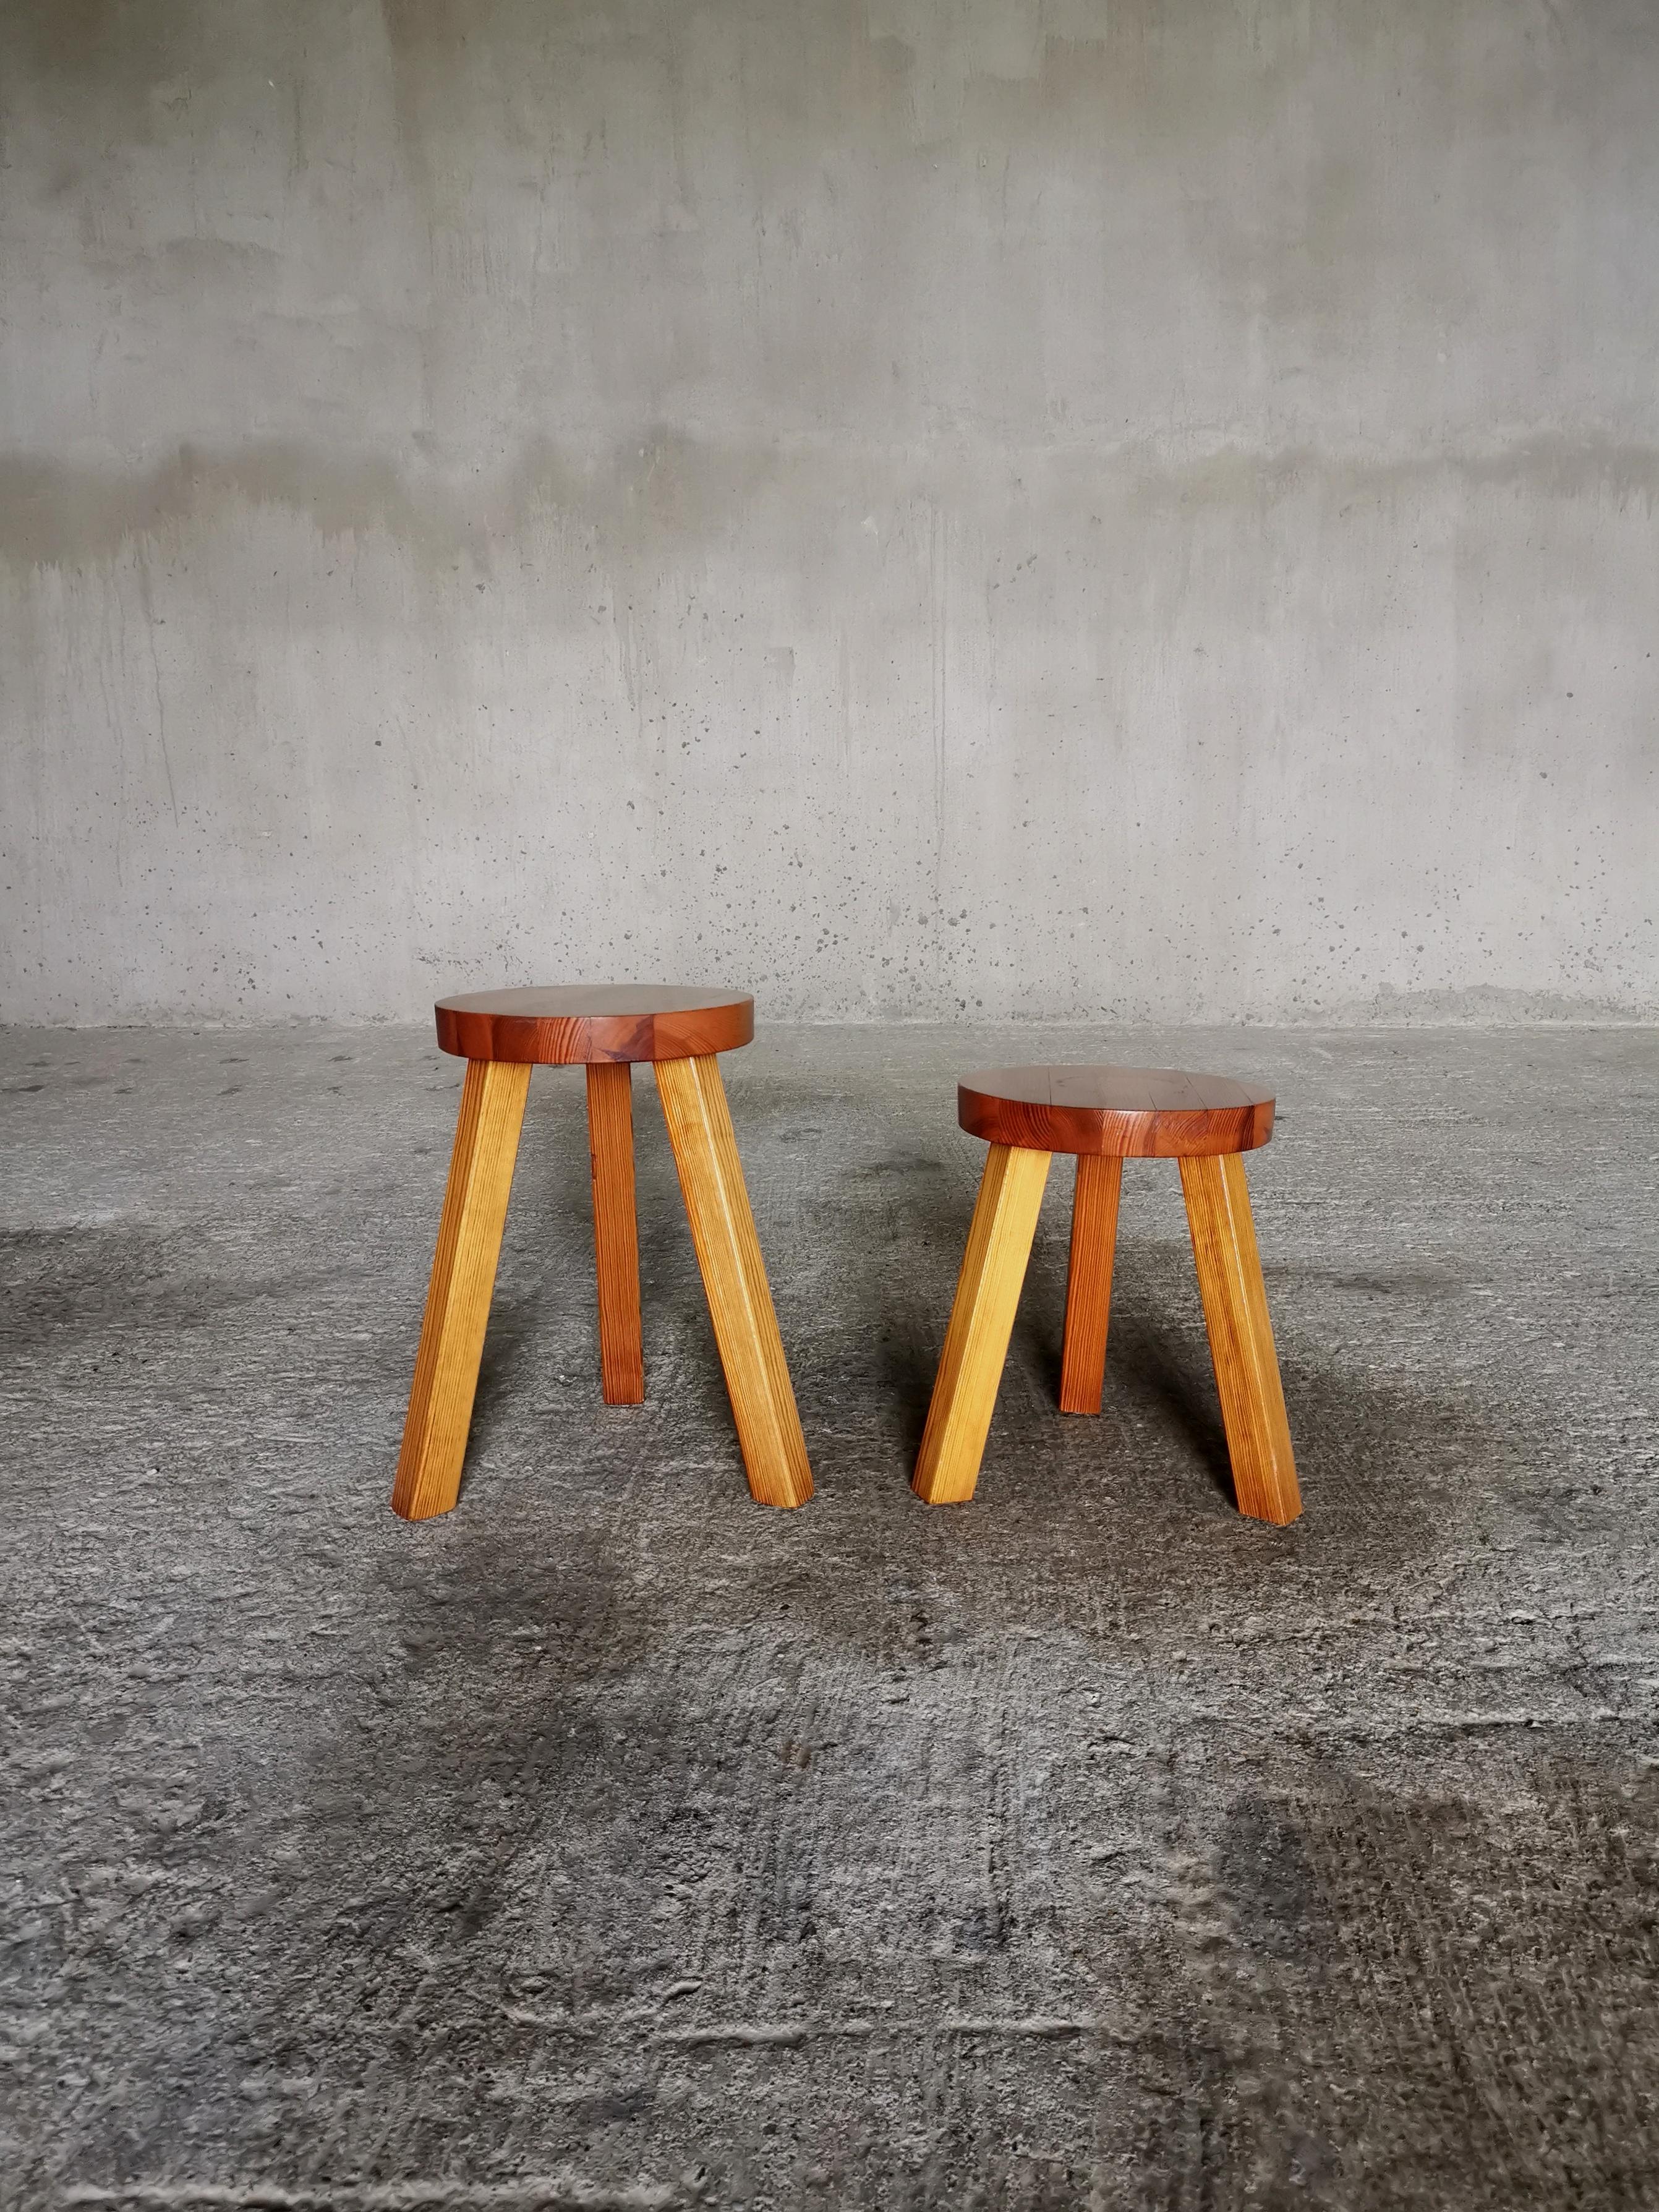 A pair of Swedish stools in solid pine. 
Sweden 1960s. 
Beautiful wood grains and marching patina on both stools. 
Aquired directly from the original owner. 

Small H: 37,5 cm Seat diameter: 29 cm
Large H: 46 cm Seat diameter: 29 cm
